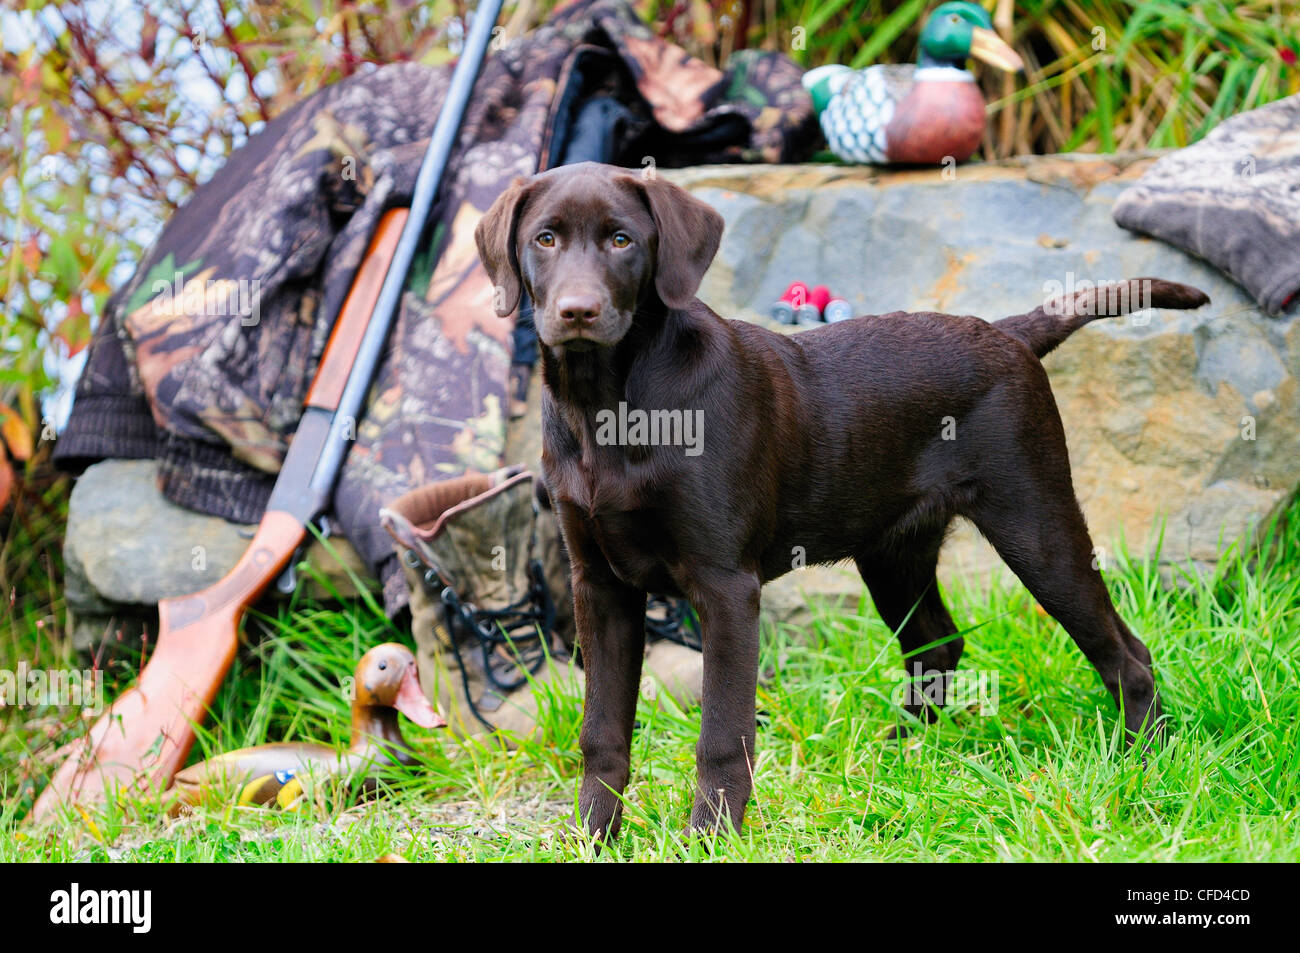 Chocolate Lab beside a Cooey12 gauge single shot shotgun, a camouflage jacket and boots, Duncan, British Columbia, Canada. Stock Photo